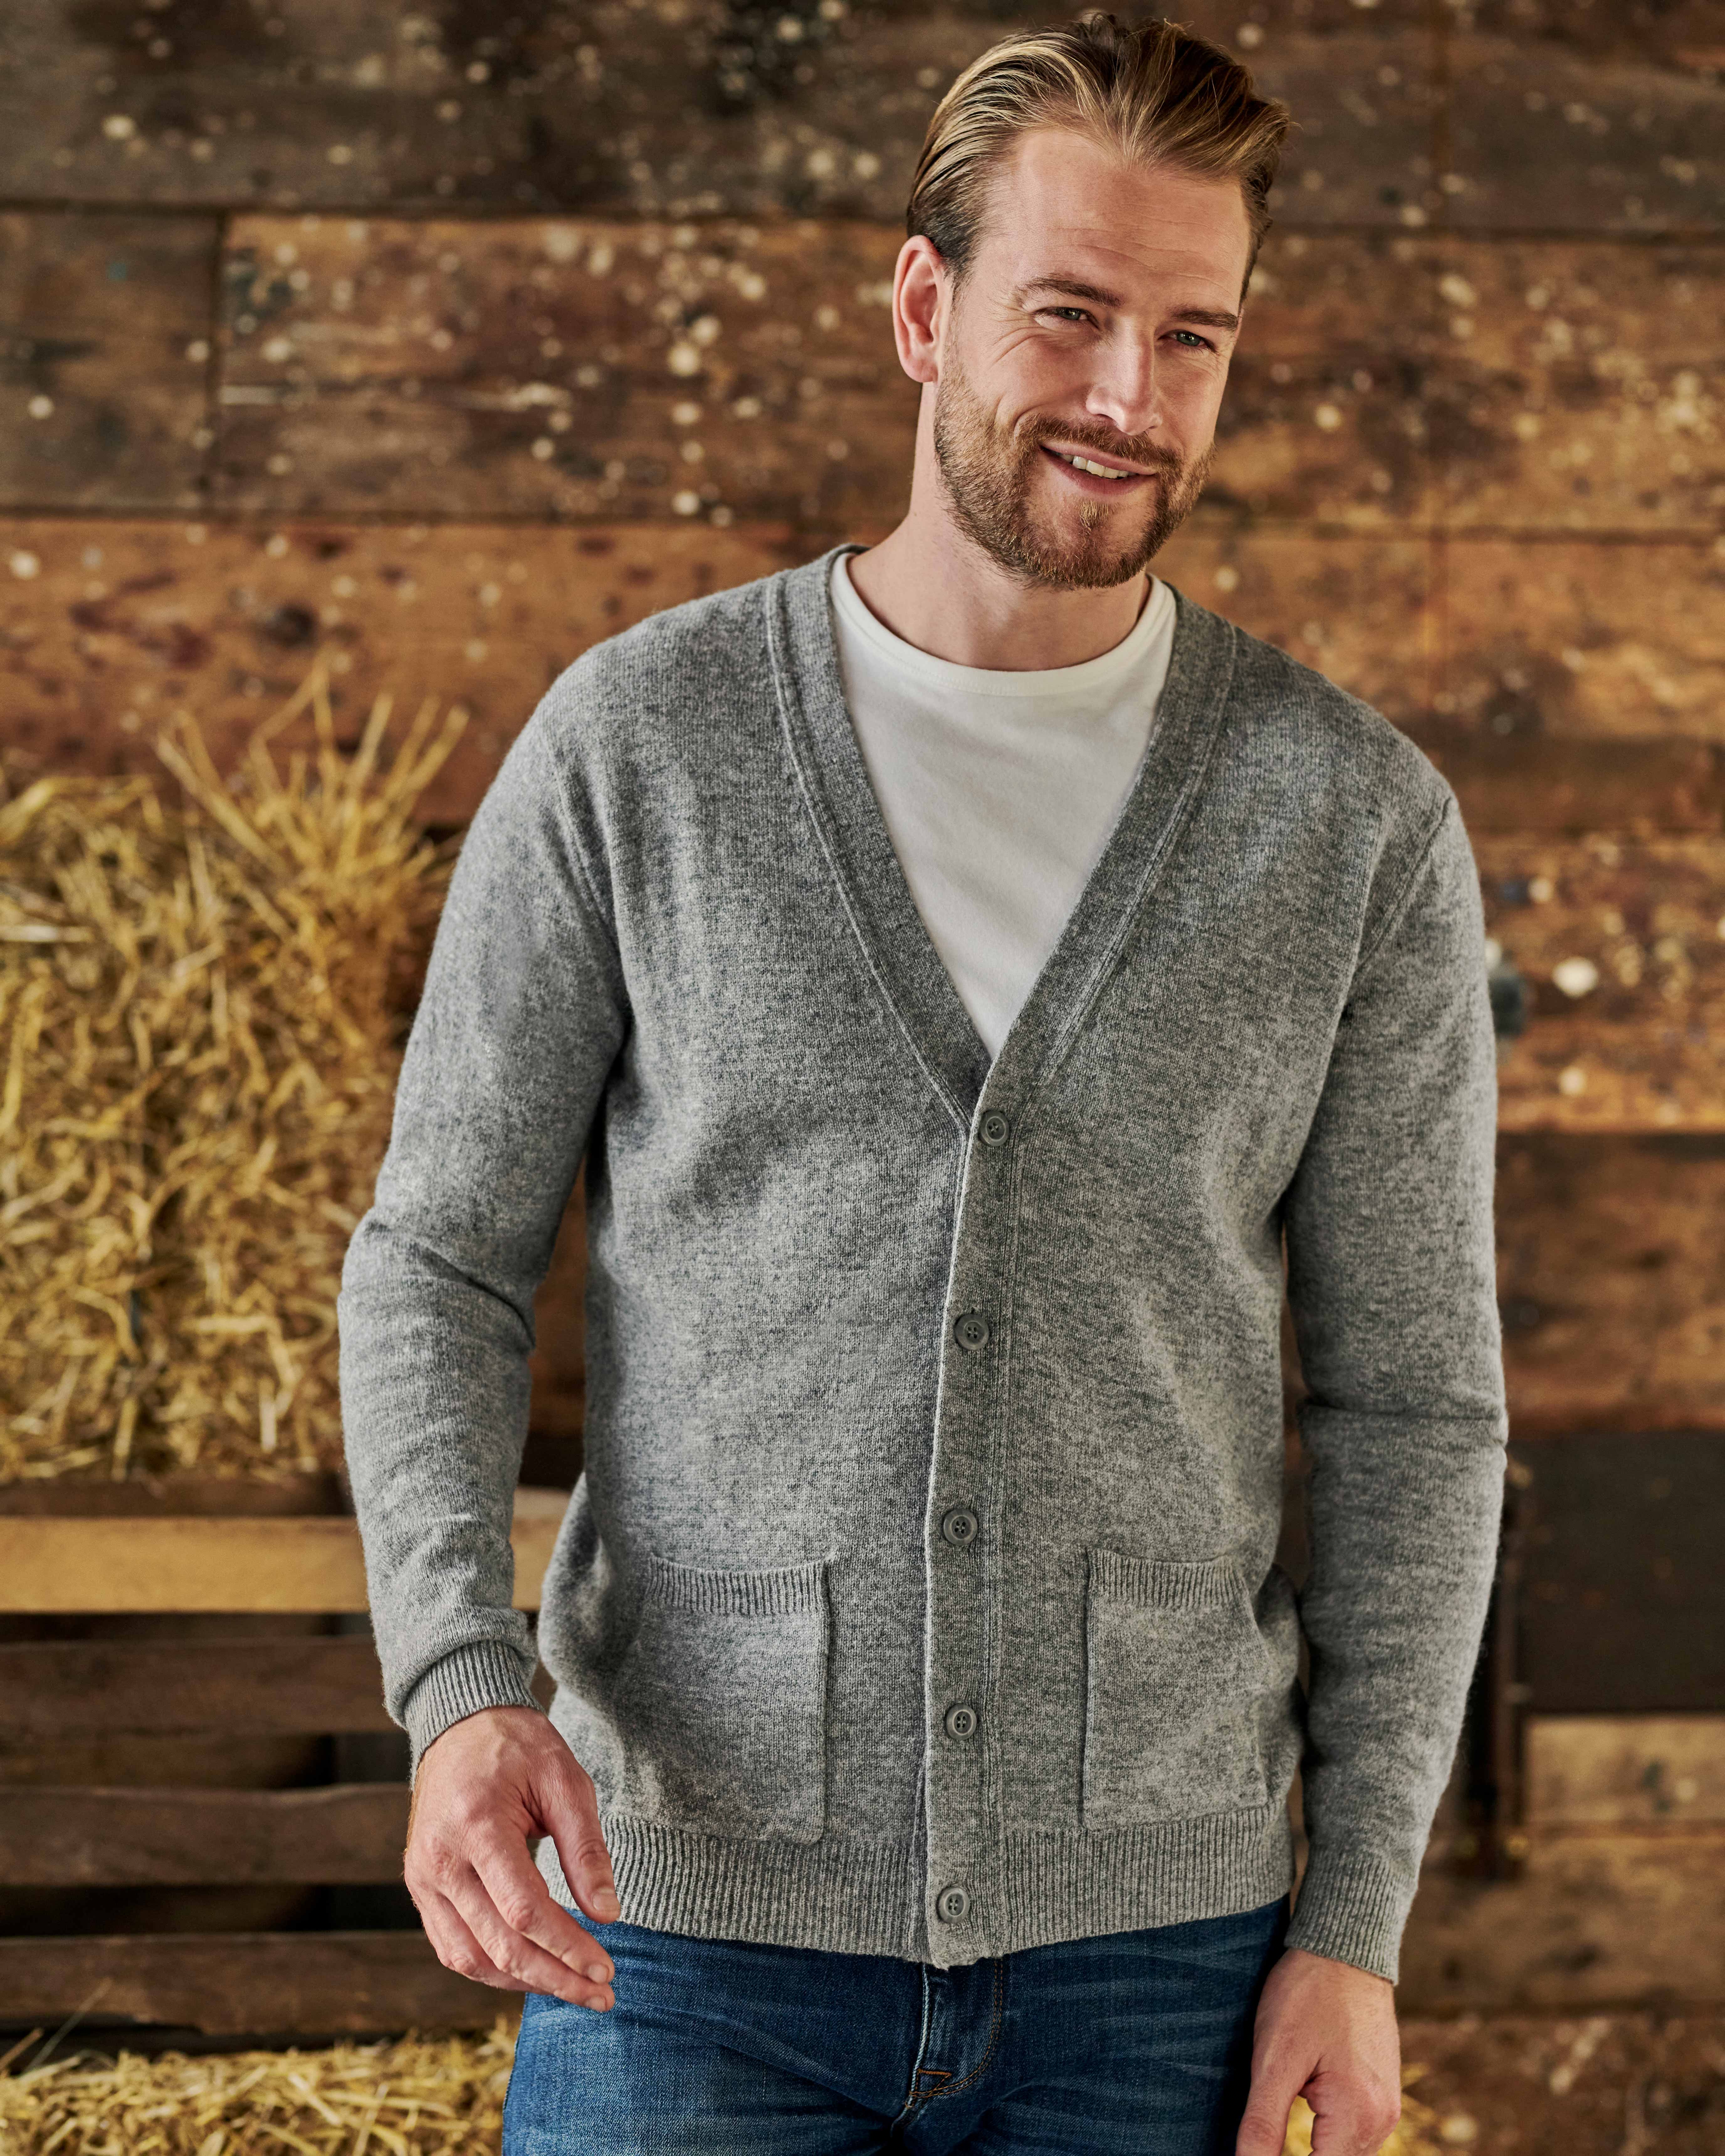 Mens Cardigans | Quality Natural Cardigans for Men | WoolOvers UK